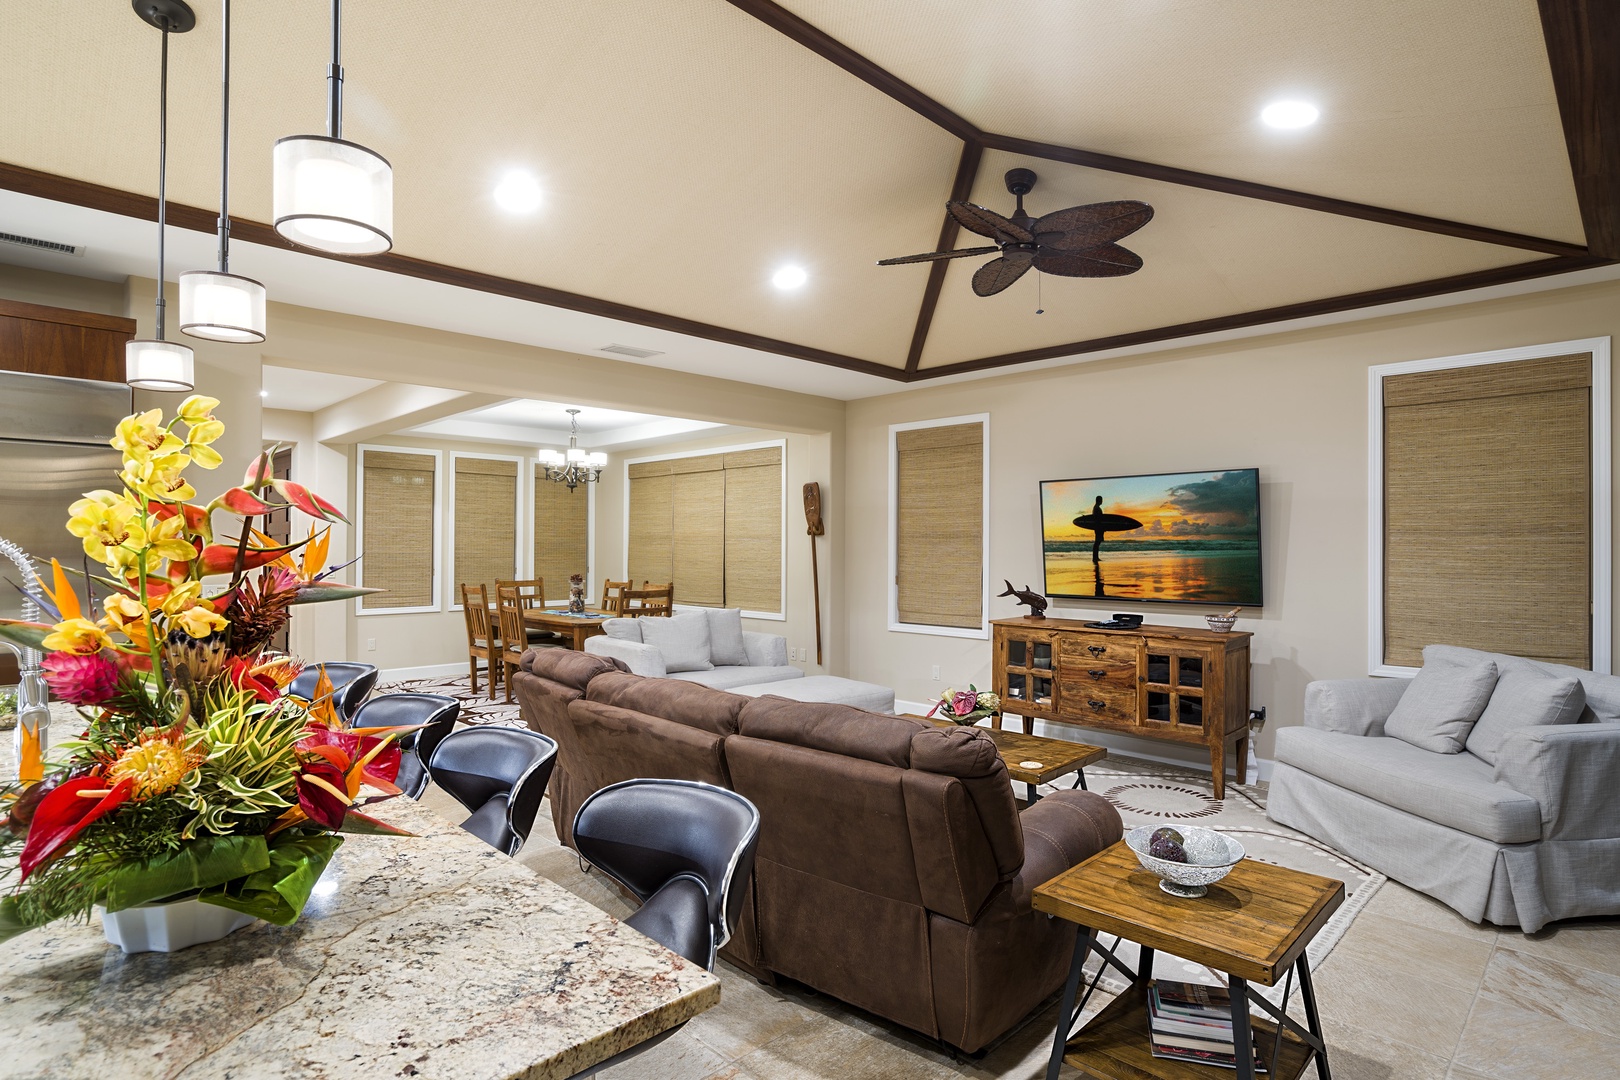 Kailua Kona Vacation Rentals, Kona Blue Vacations Holua Kai - The seamless flow between the living space, the dining area, and the open-concept kitchen creates an ideal setting for togetherness during your stay in paradise.